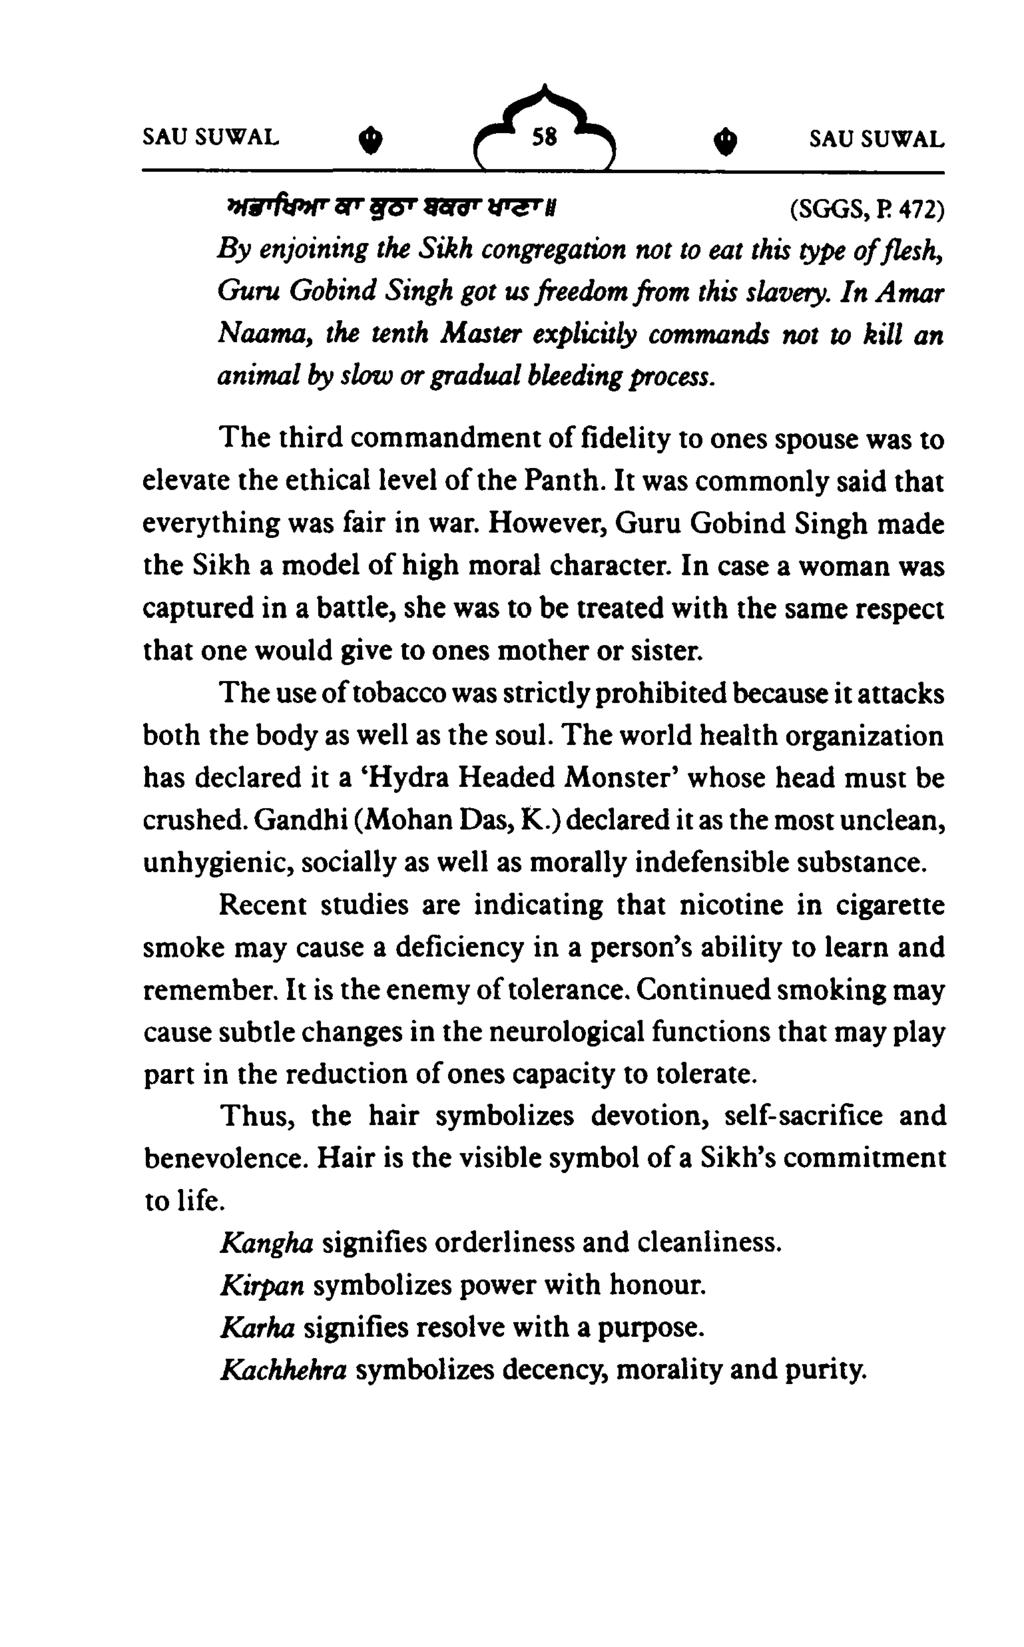 ~lift~8'zrcj" 'l'ift1i (SGGS, P. 472) By enjoining the Sikh congregation not to eat this type offlesh, Guru Gobind Singh got us freedom from this slavery.